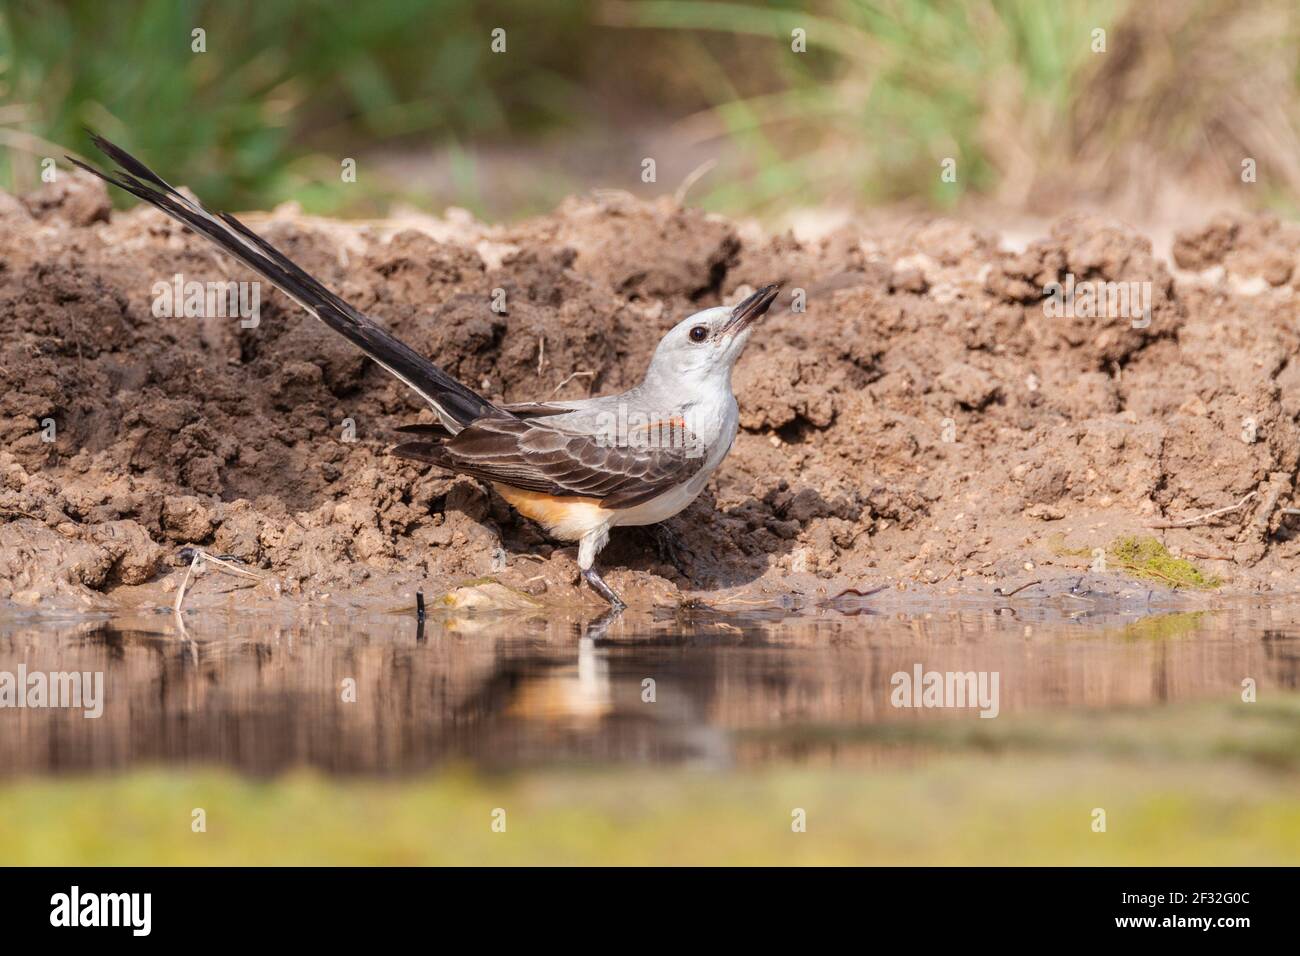 Scissor-tailed Flycatcher, Tyrannus forficatus, on a ranch in South Texas. This is the state bird of Oklahoma. Stock Photo